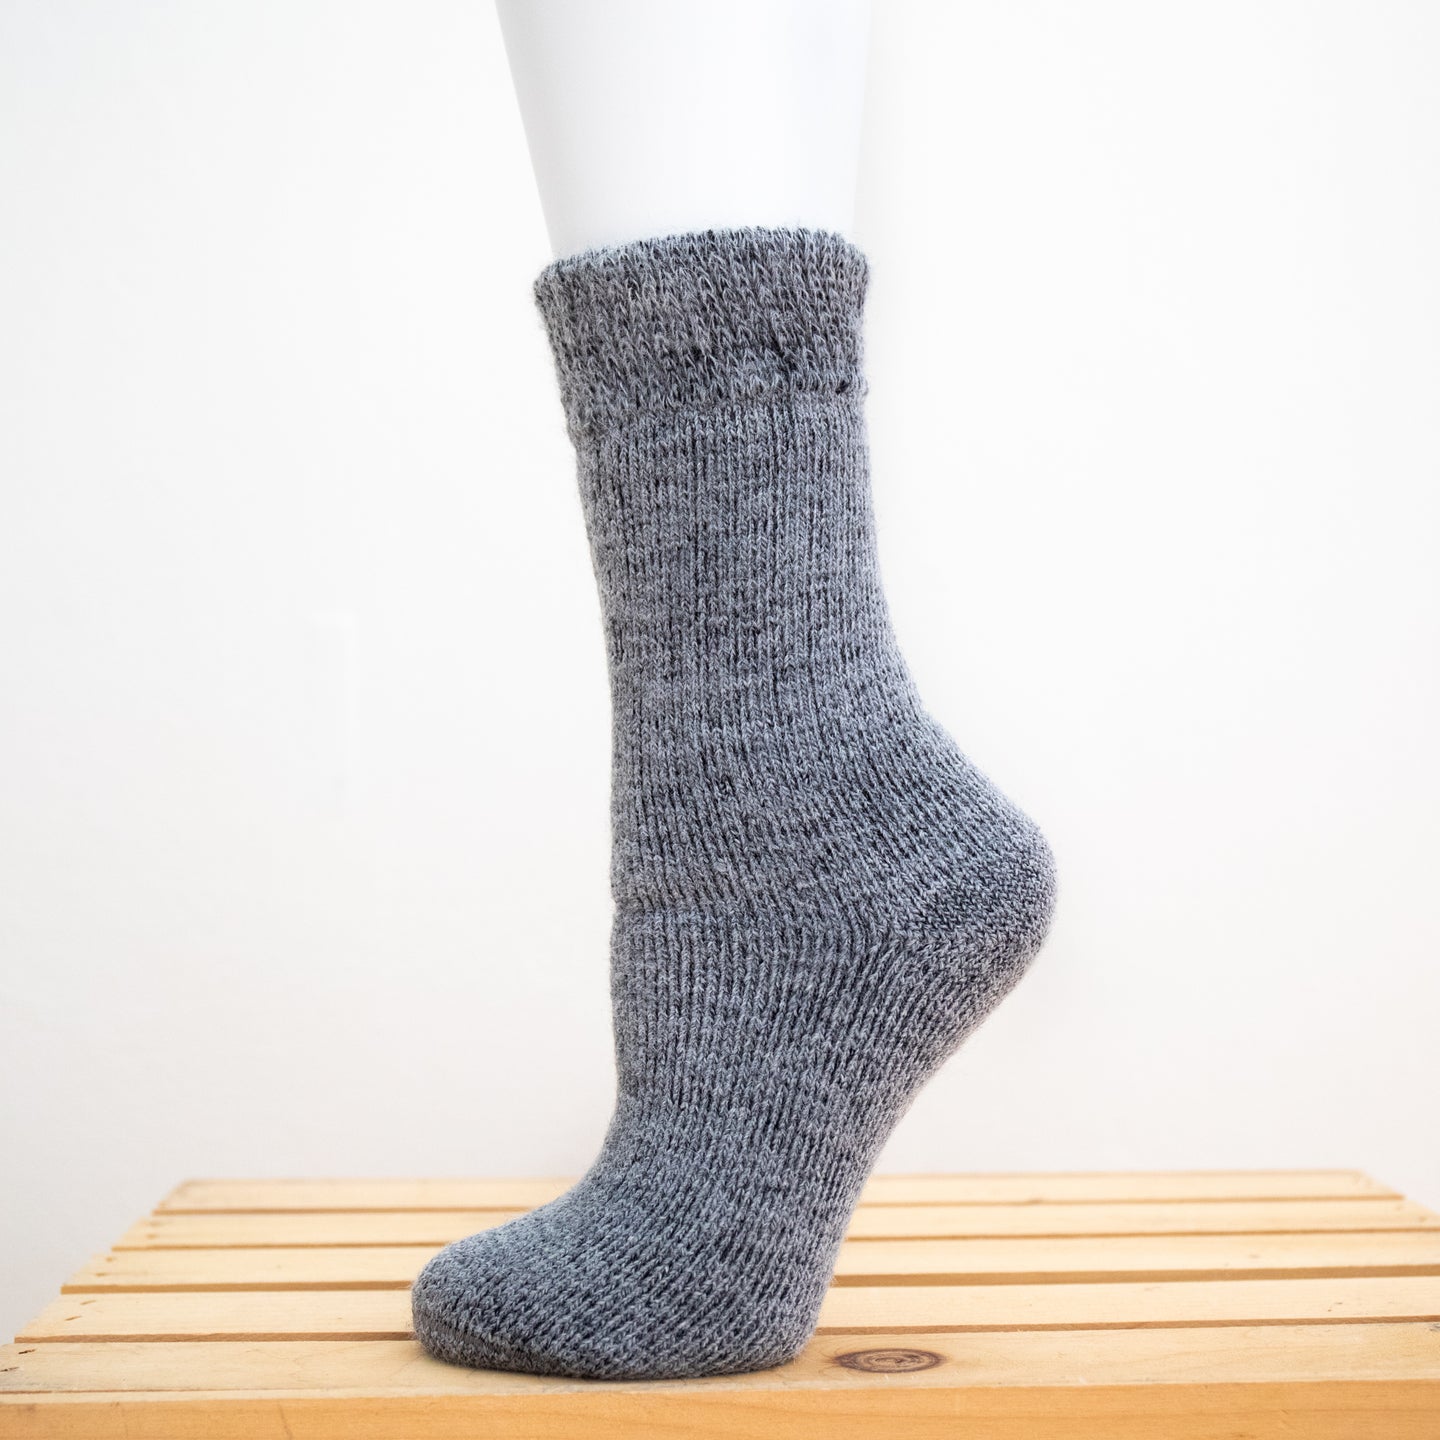 How to Care for Your Wool Hiking Socks (when your hiking) – Hollow Socks